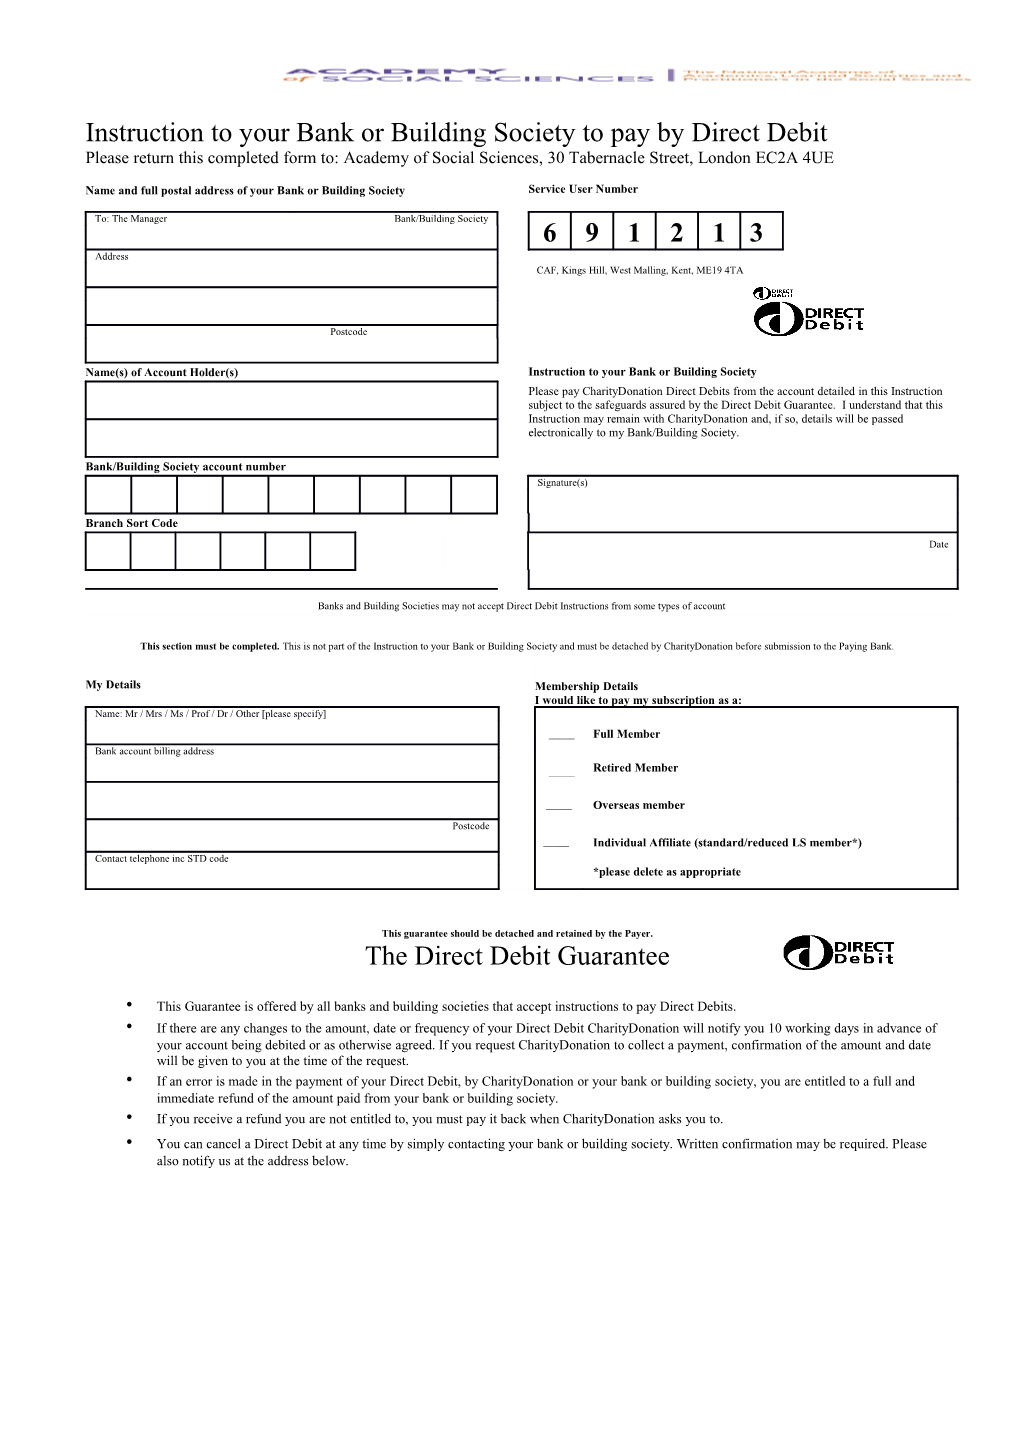 Please Fill in the Whole Form and Return To